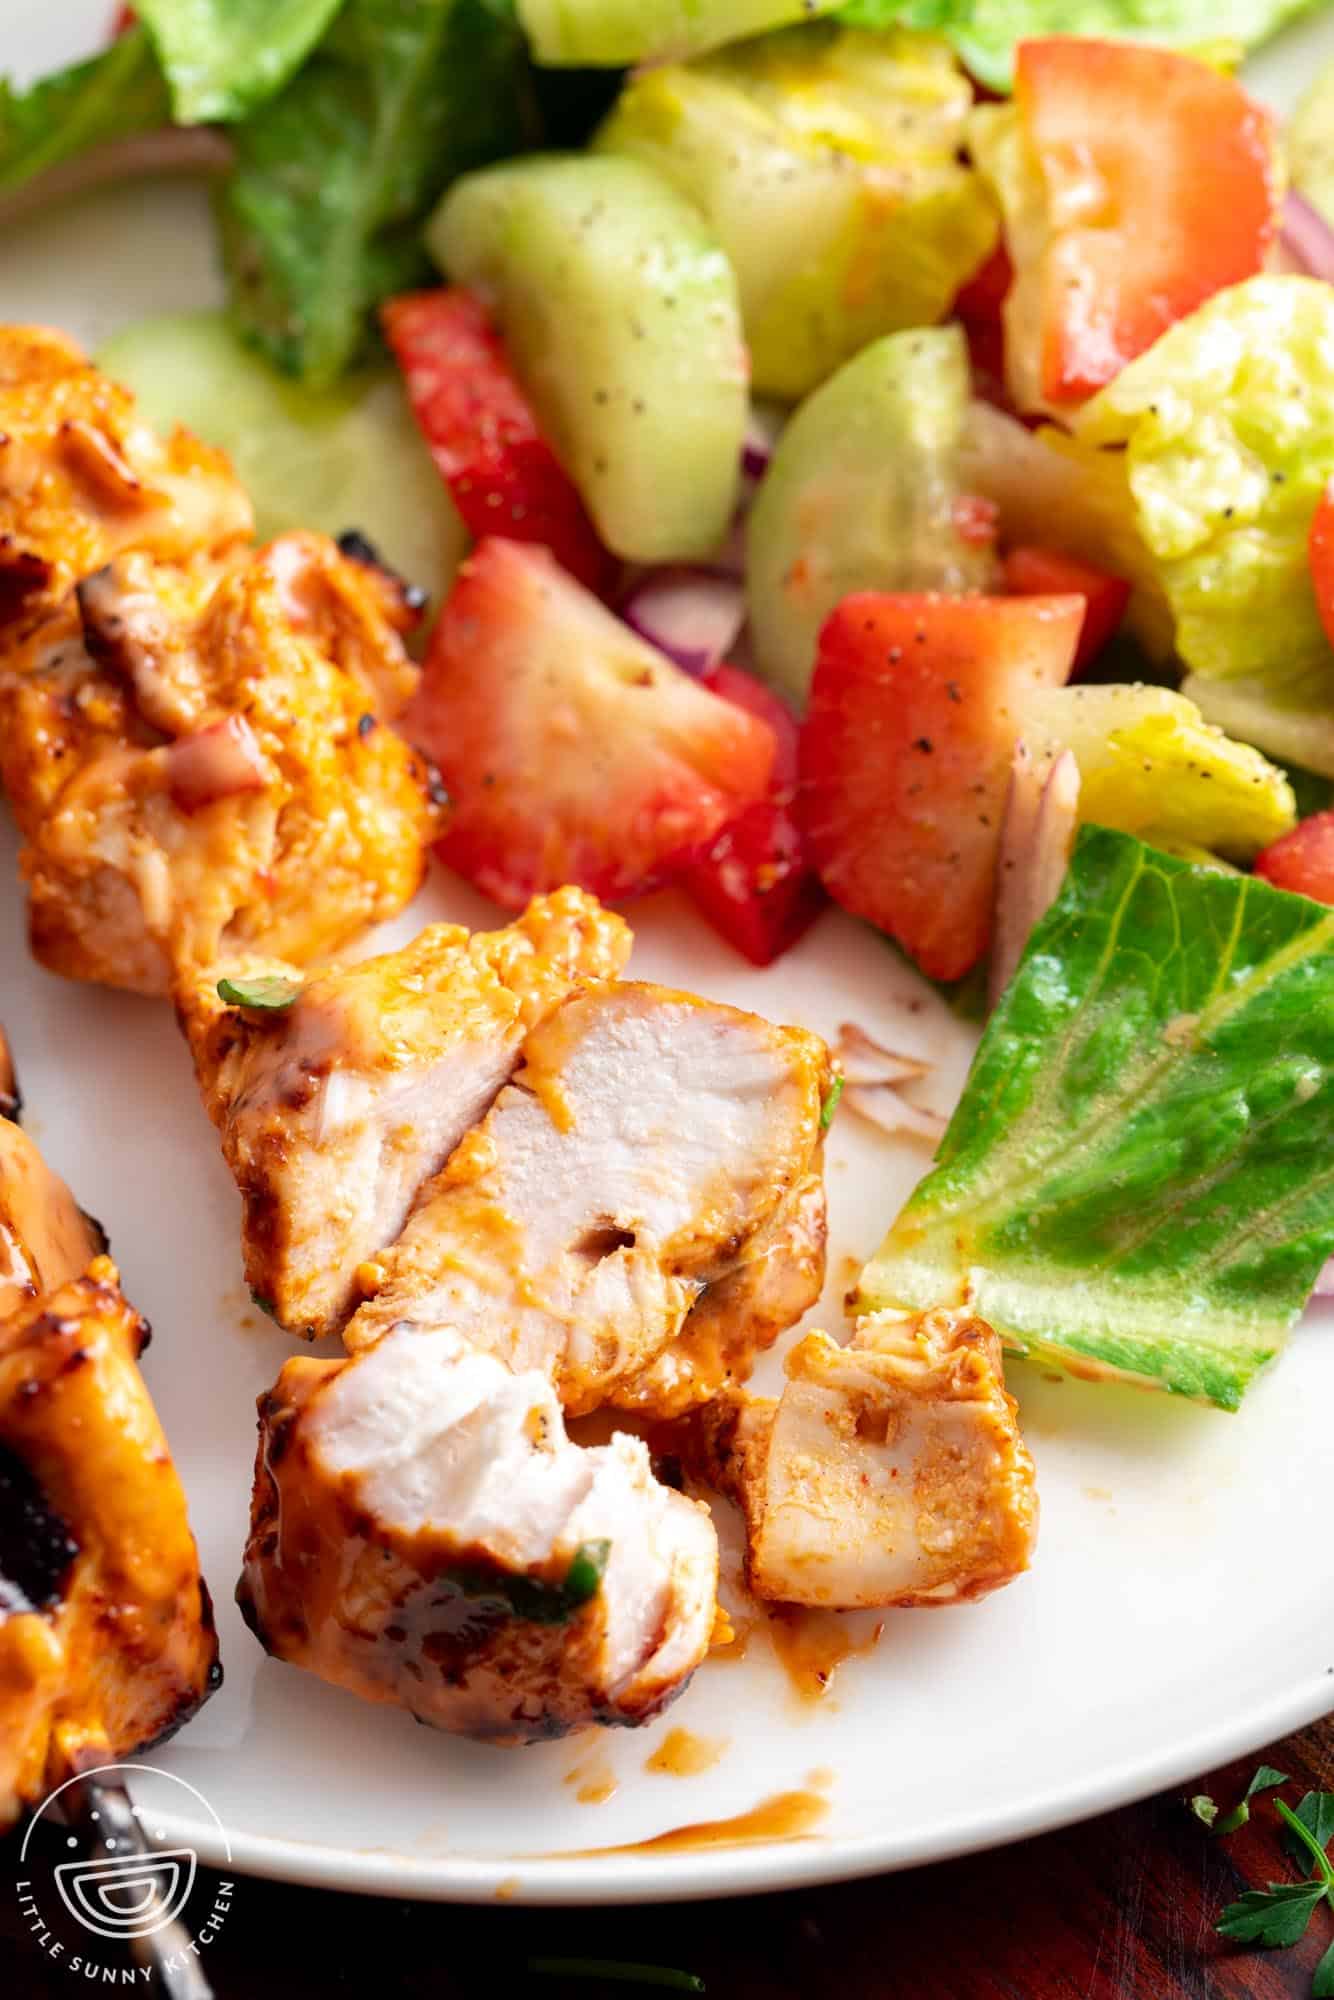 grilled bang bang chicken skewers on a plate with a fresh salad.